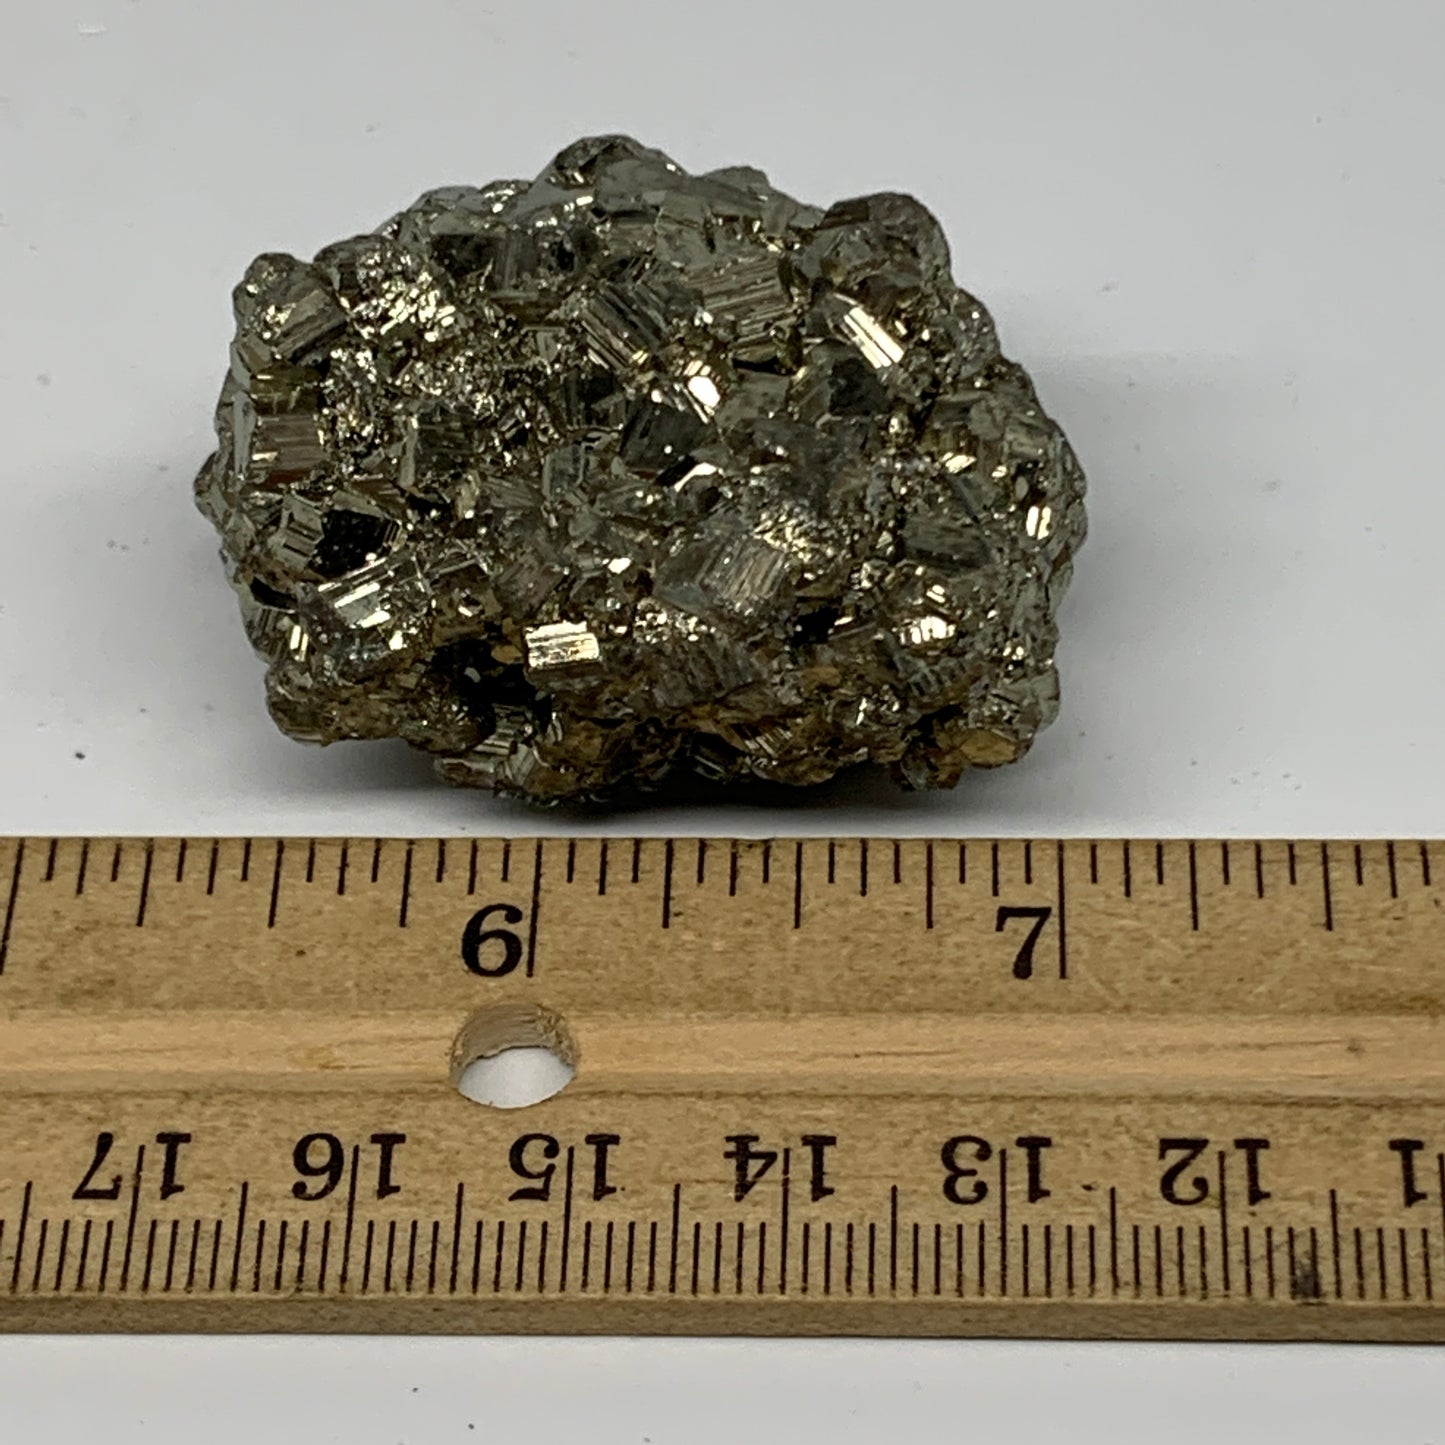 87.1g, 1.7"x1.5"x1.1", Natural Untreated Pyrite Cluster Mineral Specimens,B19366